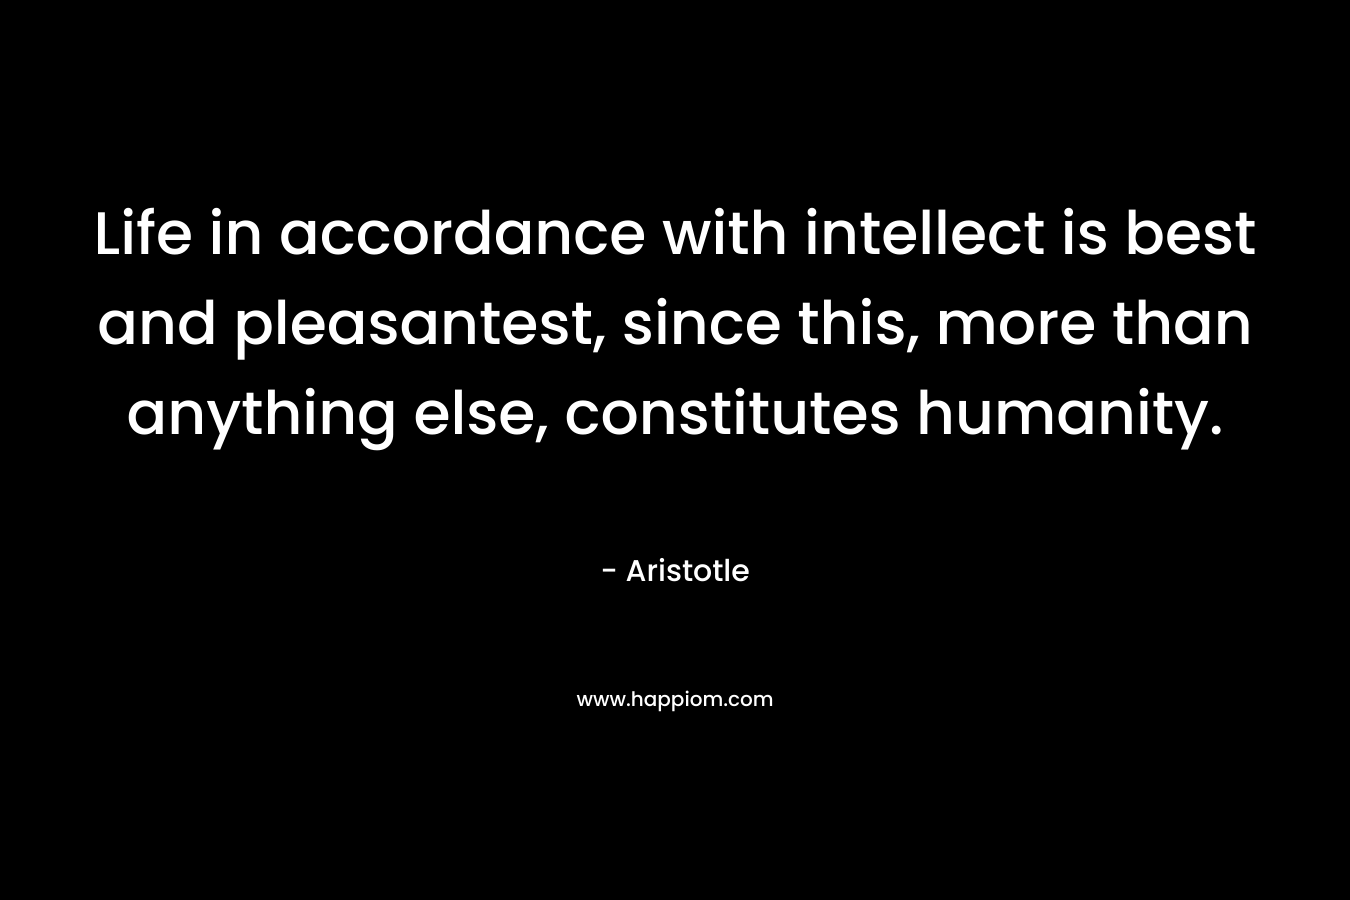 Life in accordance with intellect is best and pleasantest, since this, more than anything else, constitutes humanity. – Aristotle